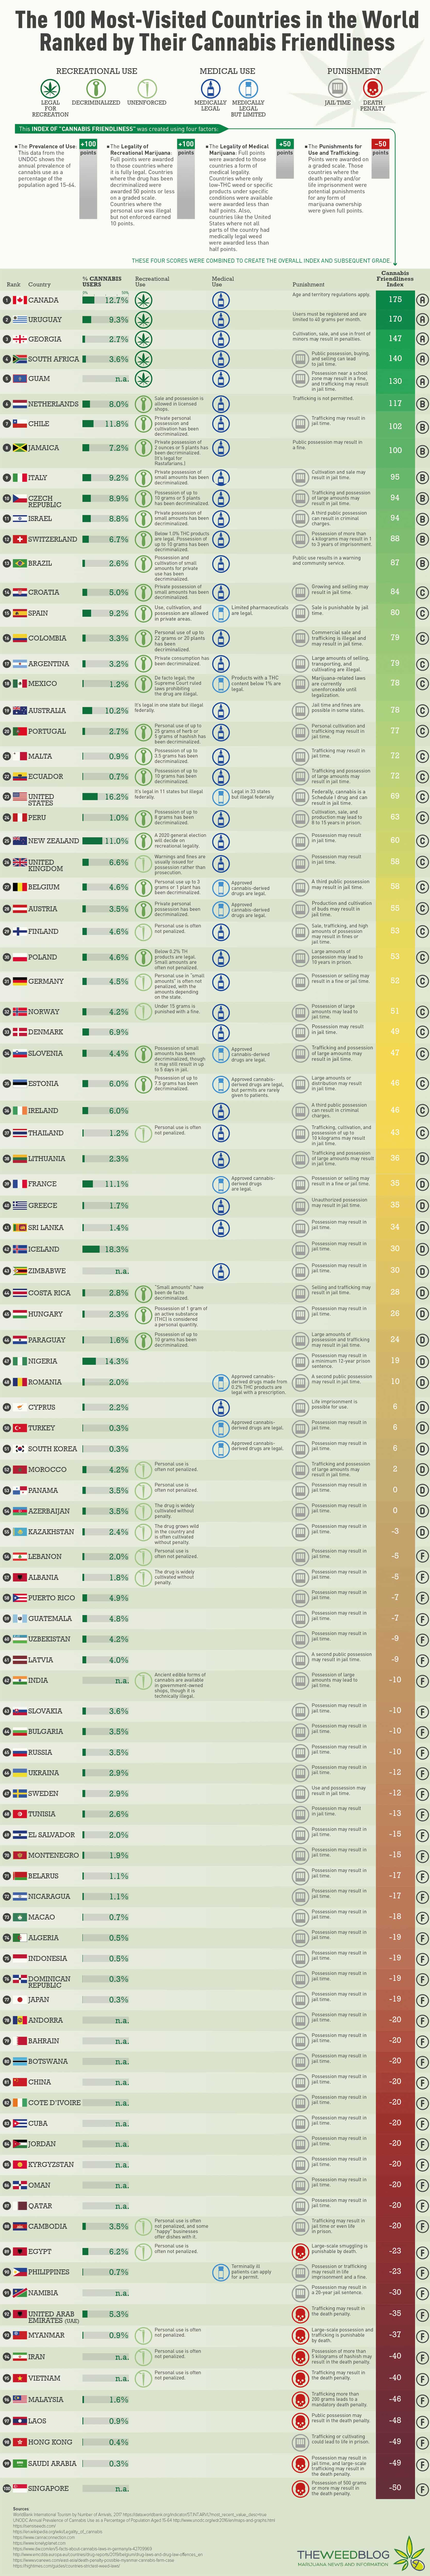 The 100 Most-Visited Countries in the World Ranked by Their Cannabis Friendliness - TheWeedBlog.com - Infographic